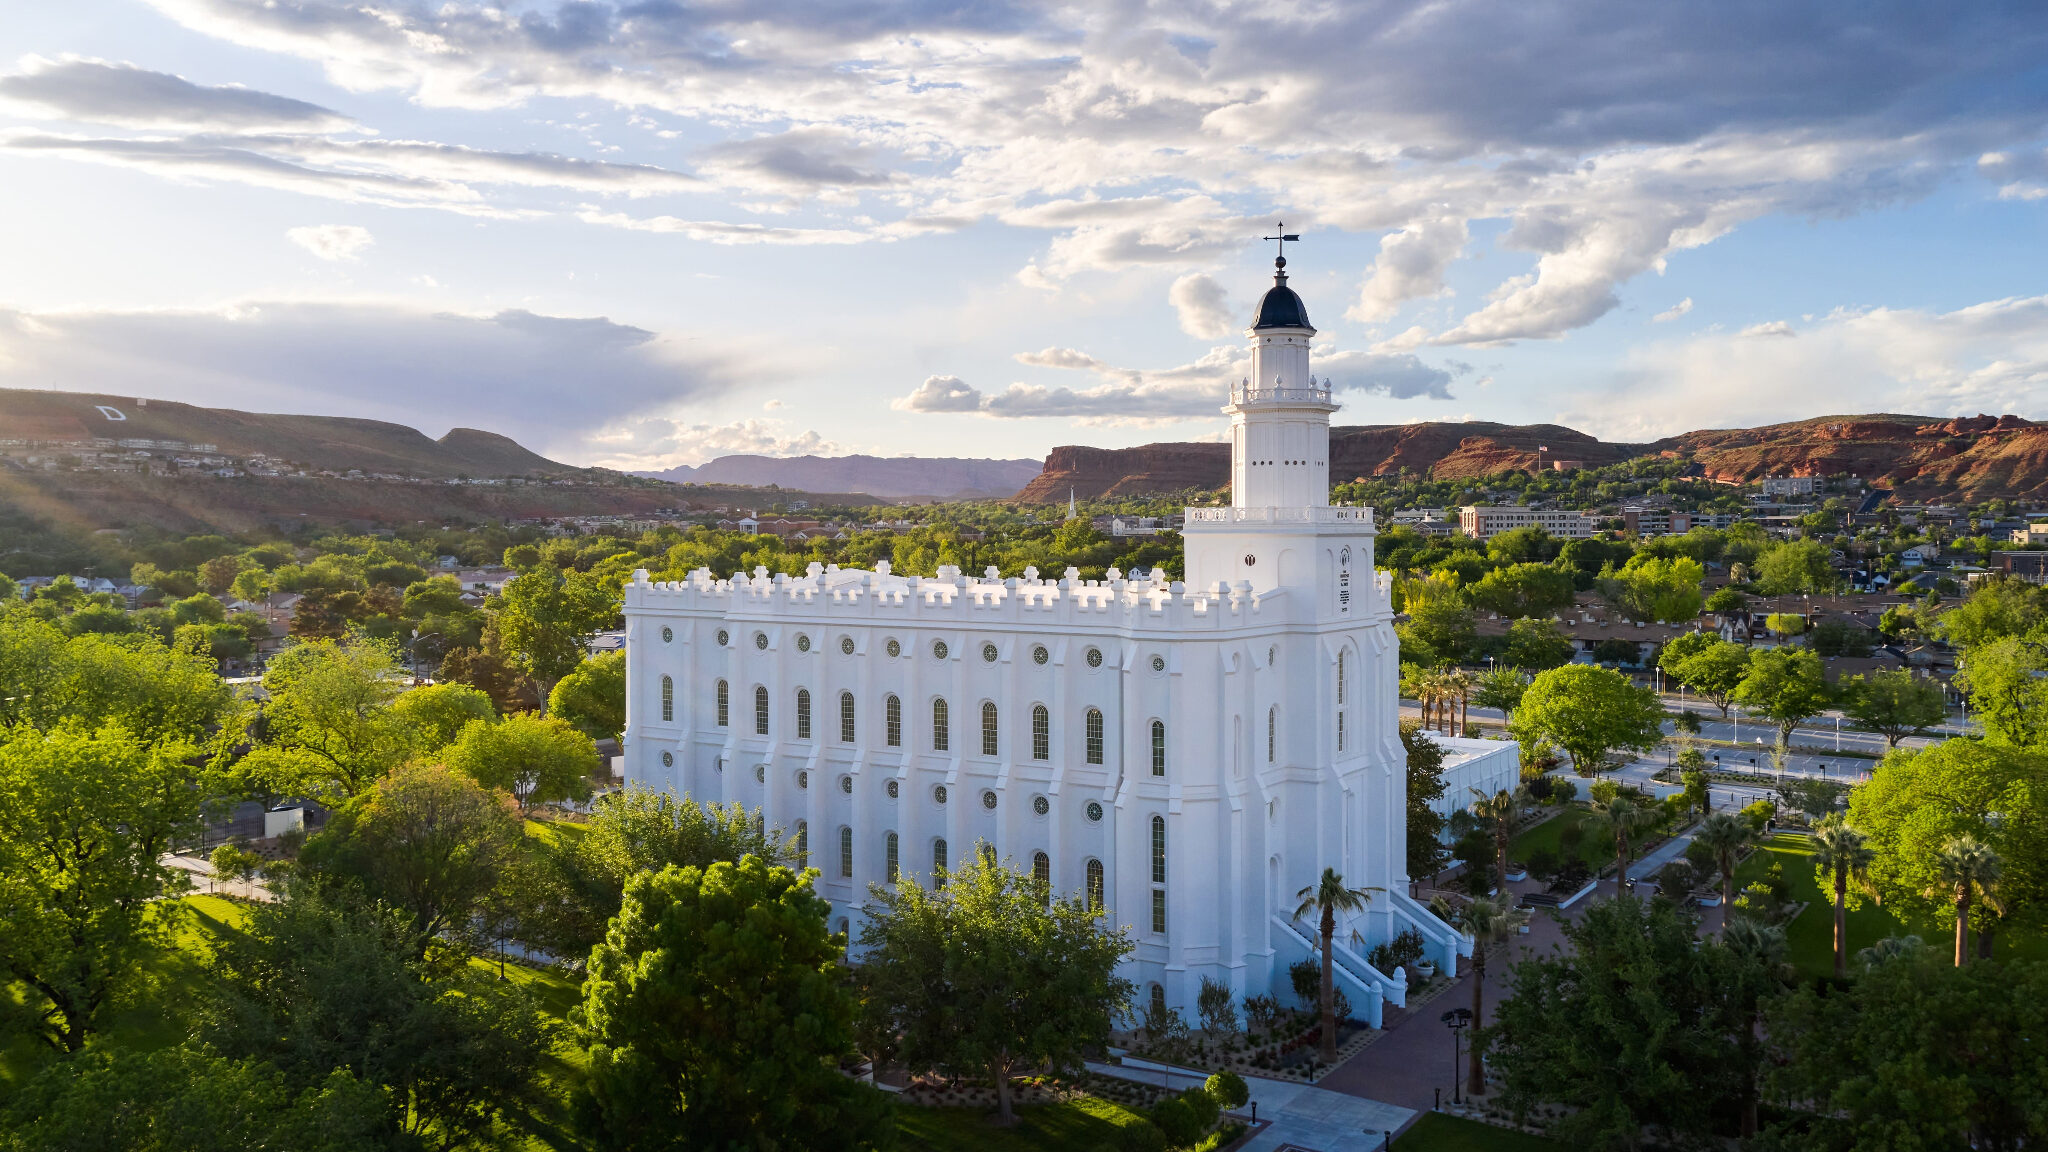 The St. George Utah Temple. Photo credit: The Church of Jesus Christ of Latter-day Saints....